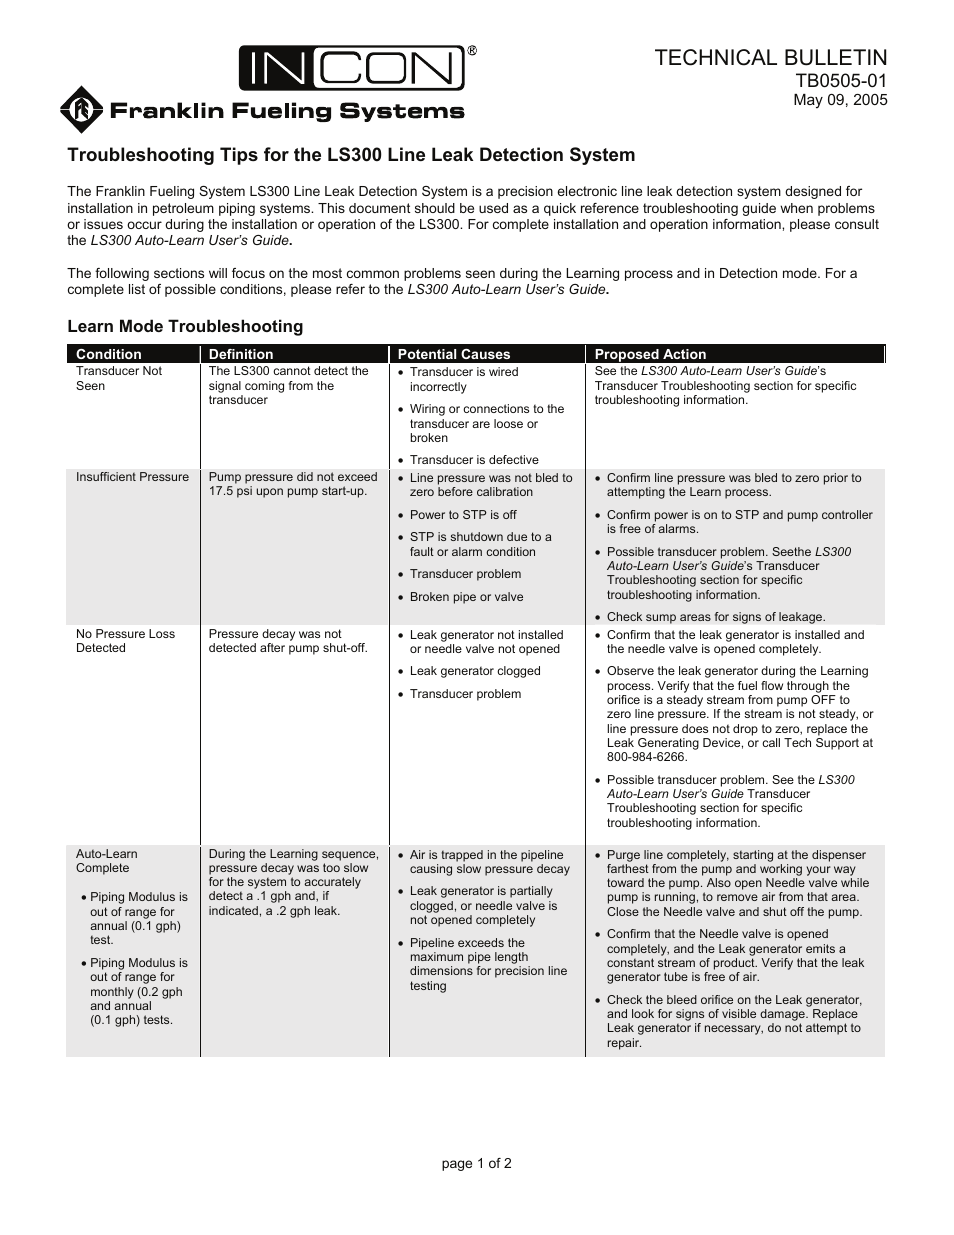 TS-LS300 Troubleshooting Tips for the LS300 Line Leak Detection System